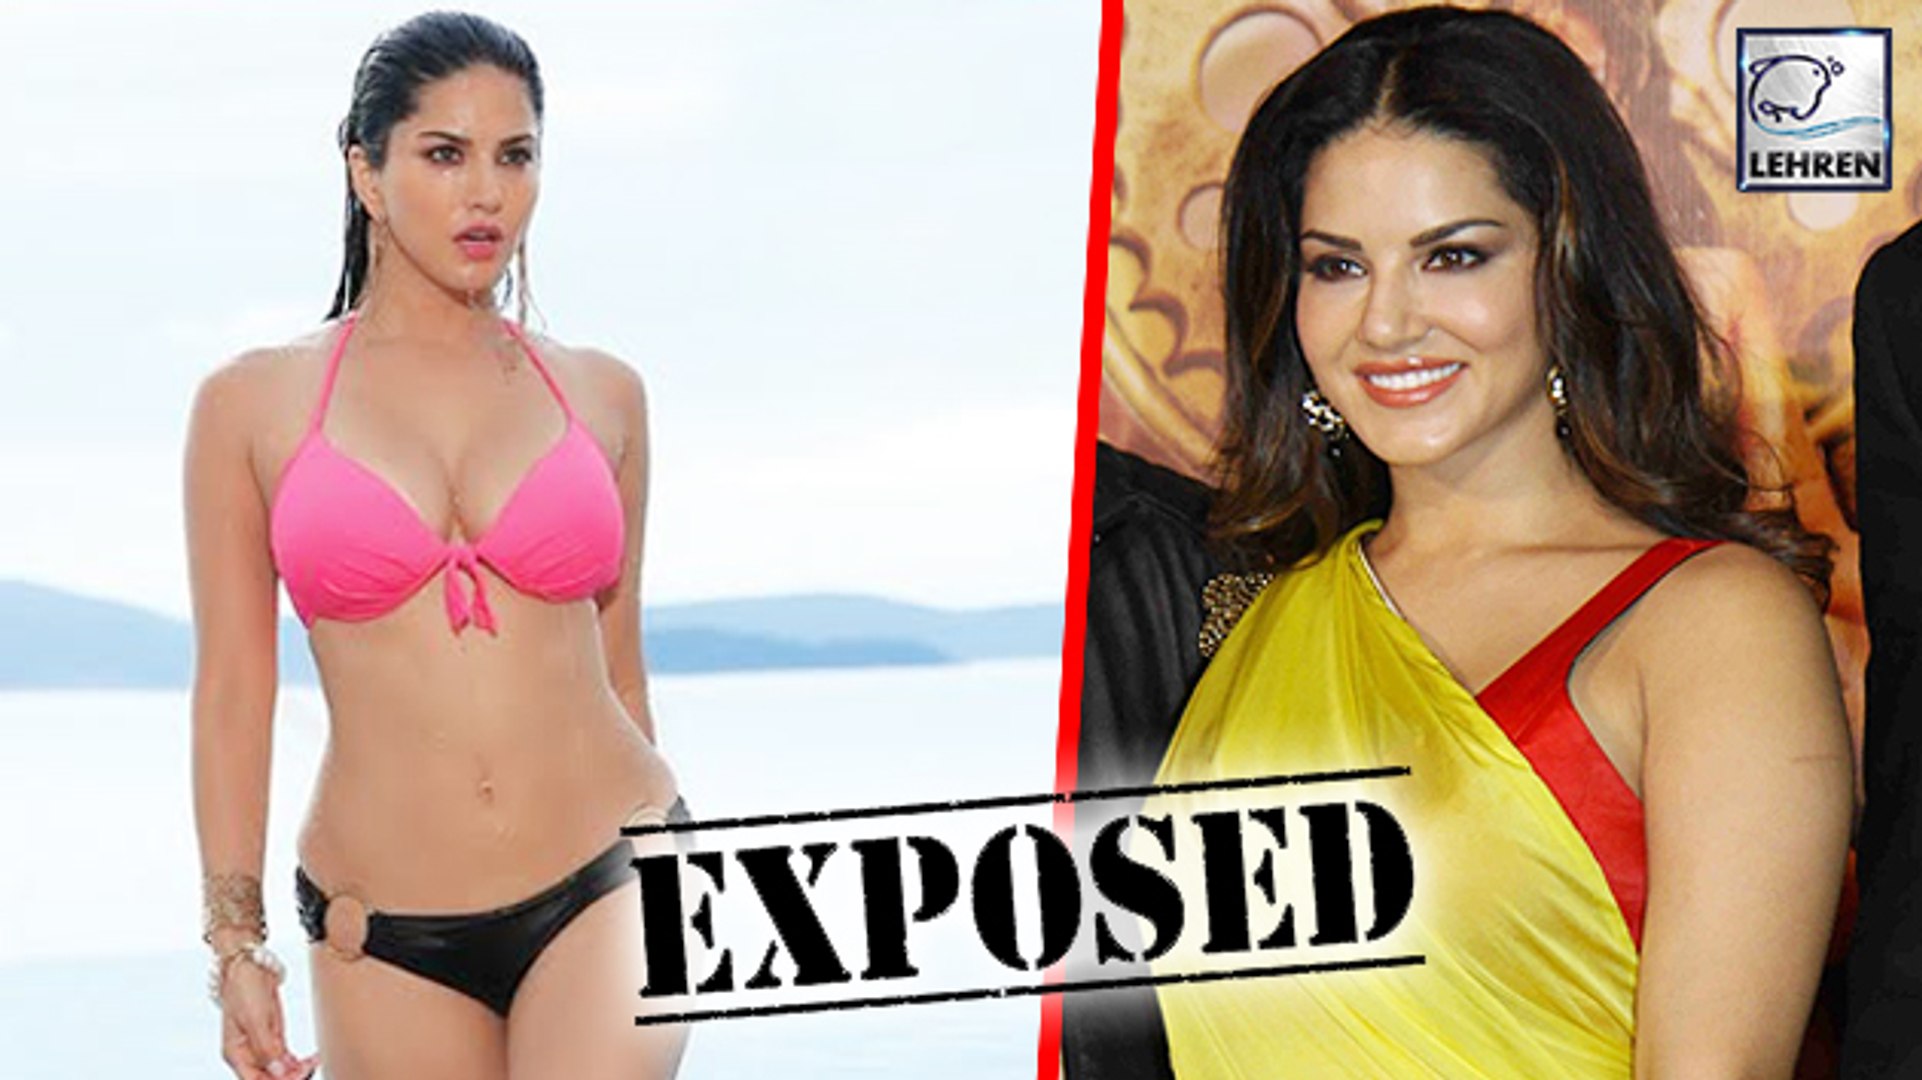 Only Sleep Sunny Leone Sexy Video Hd - Sunny Leone's Double Standards EXPOSED! - video Dailymotion